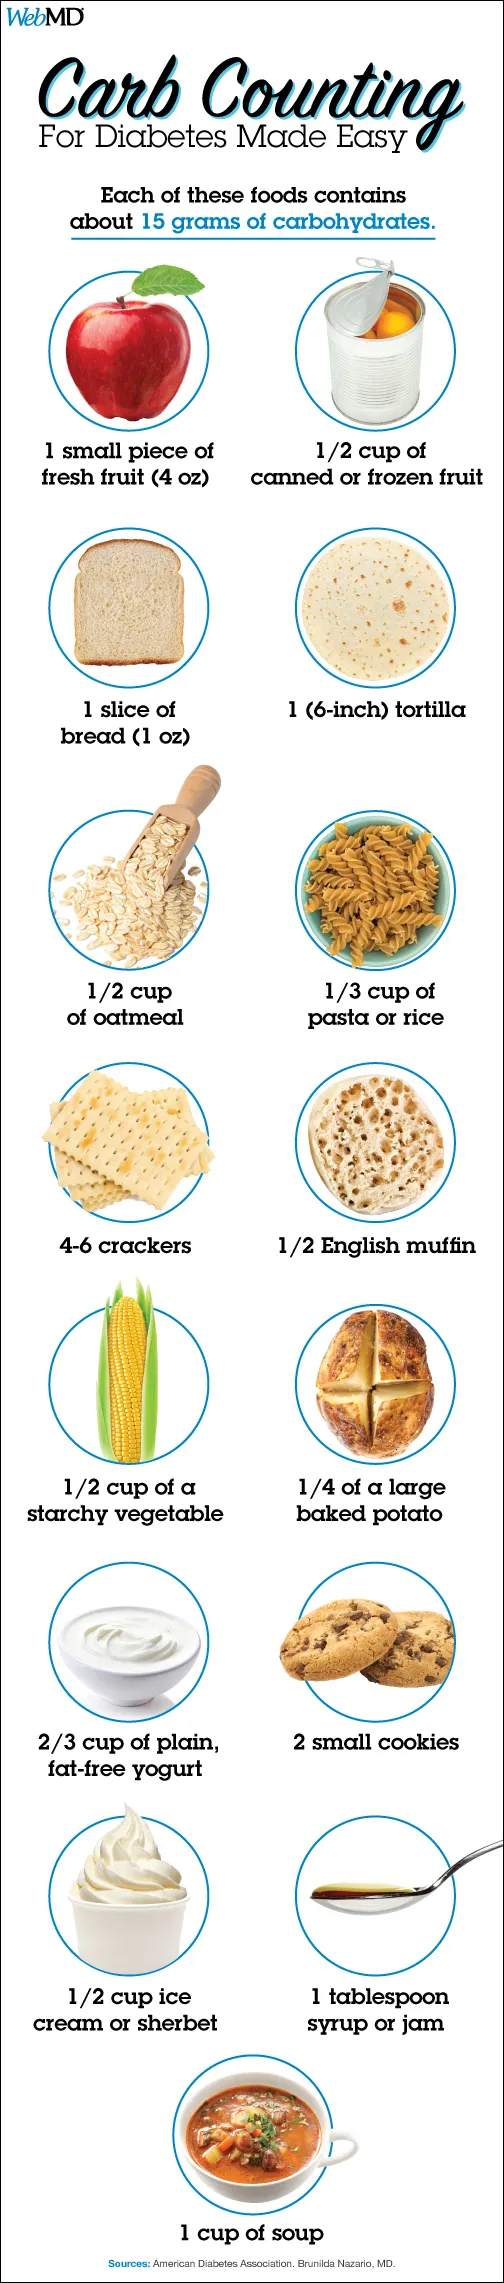 Carbohydrate Counting Chart